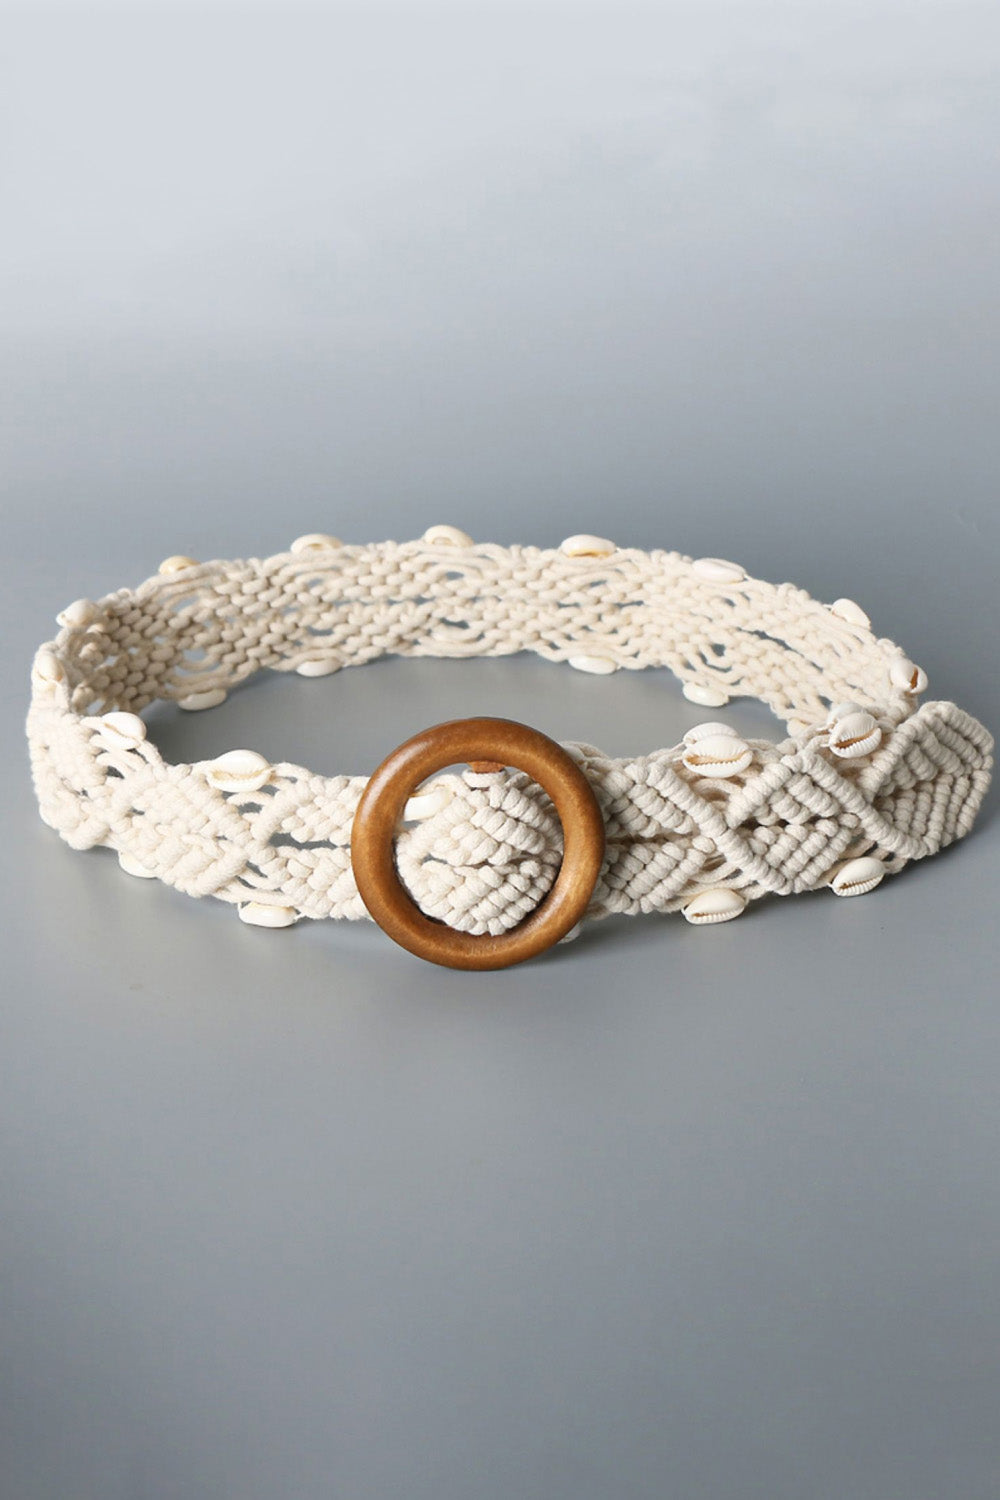 Shell Braid Belt with Wood Buckle Print on any thing USA/STOD clothes